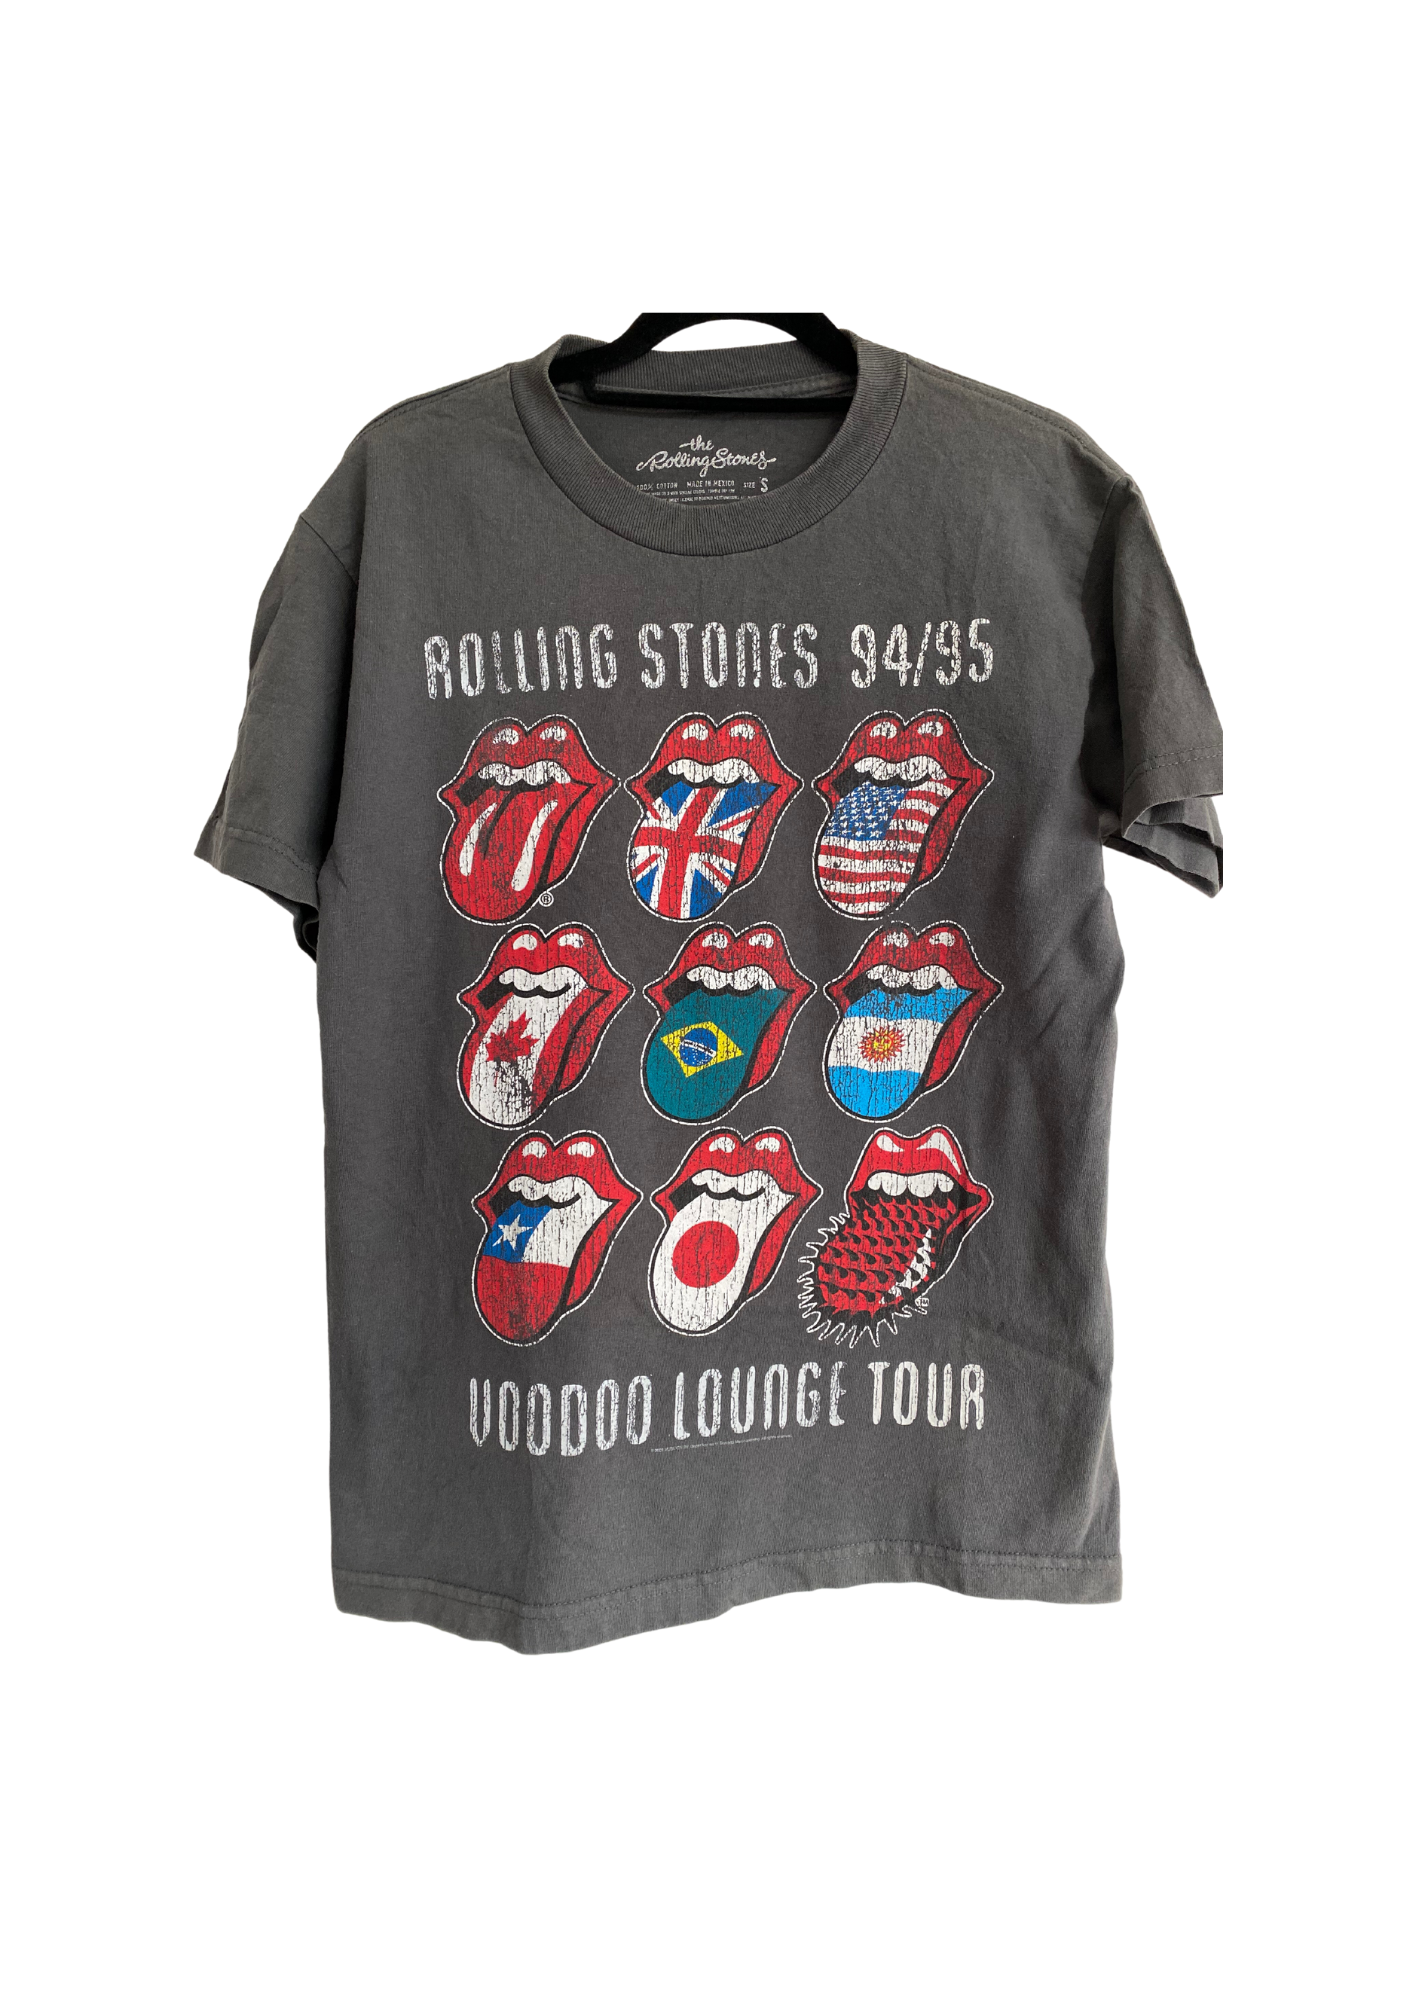 Vintage The Rolling Stones T-Shirt